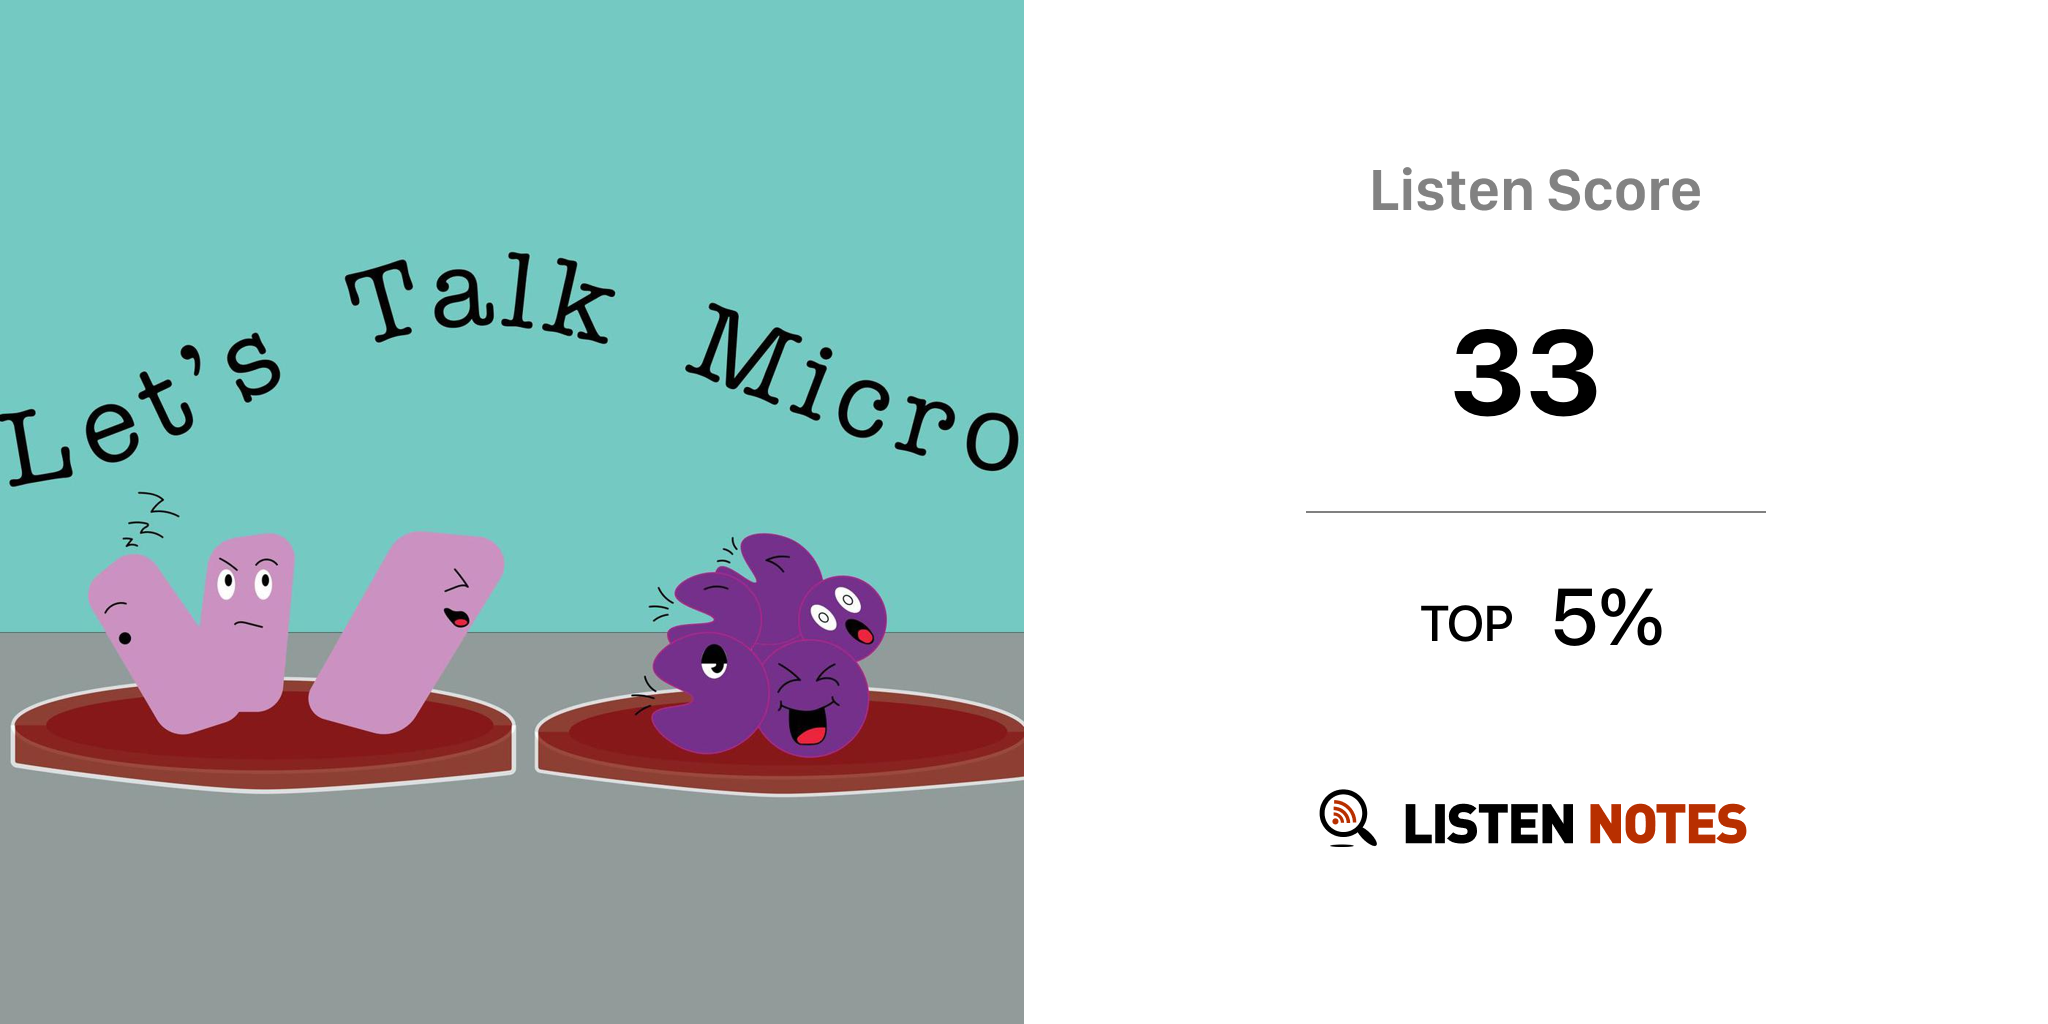 Learning Clinical Microbiology Using Podcasting: The Let's Talk Micro  Podcast